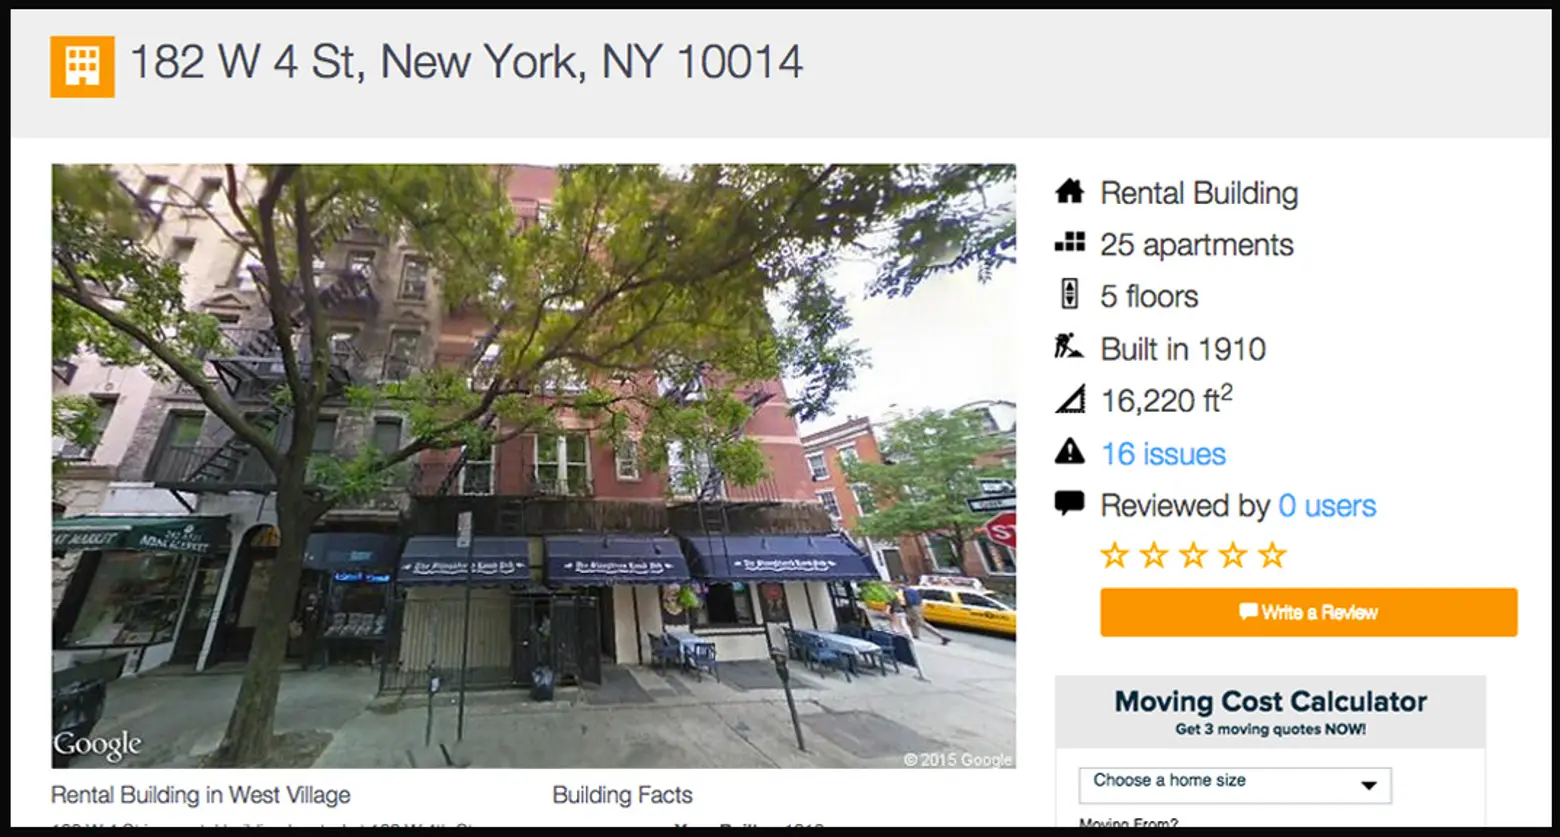 Apartable Website Helps Renters Find Out if a Building Has a Negligent Landlord